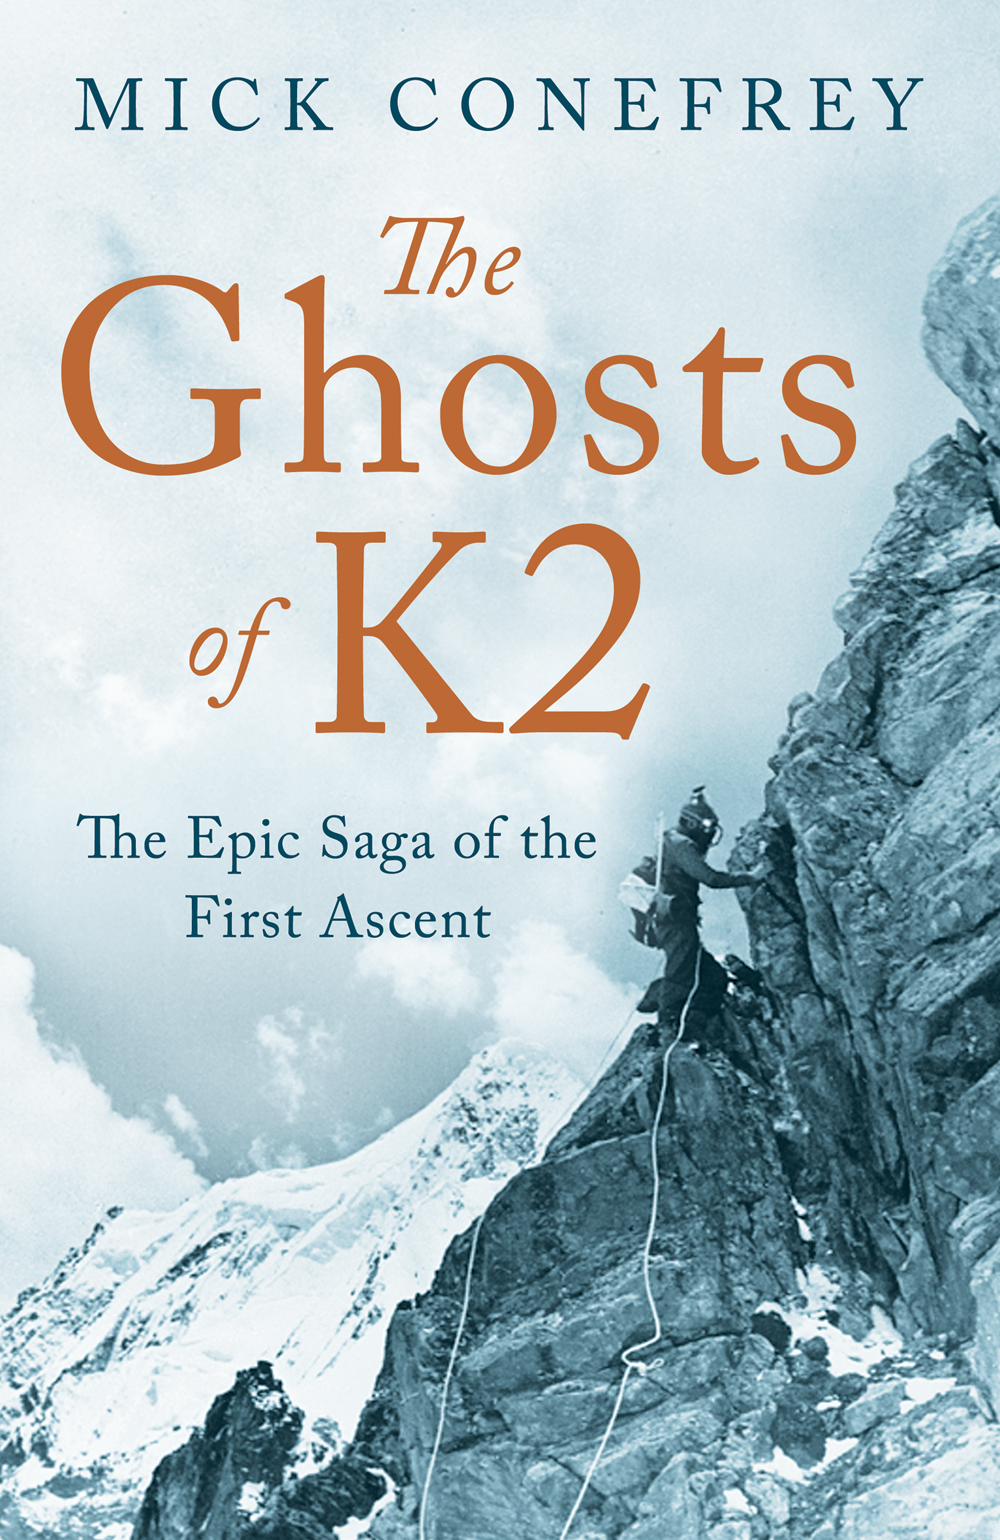 The ghosts of K2